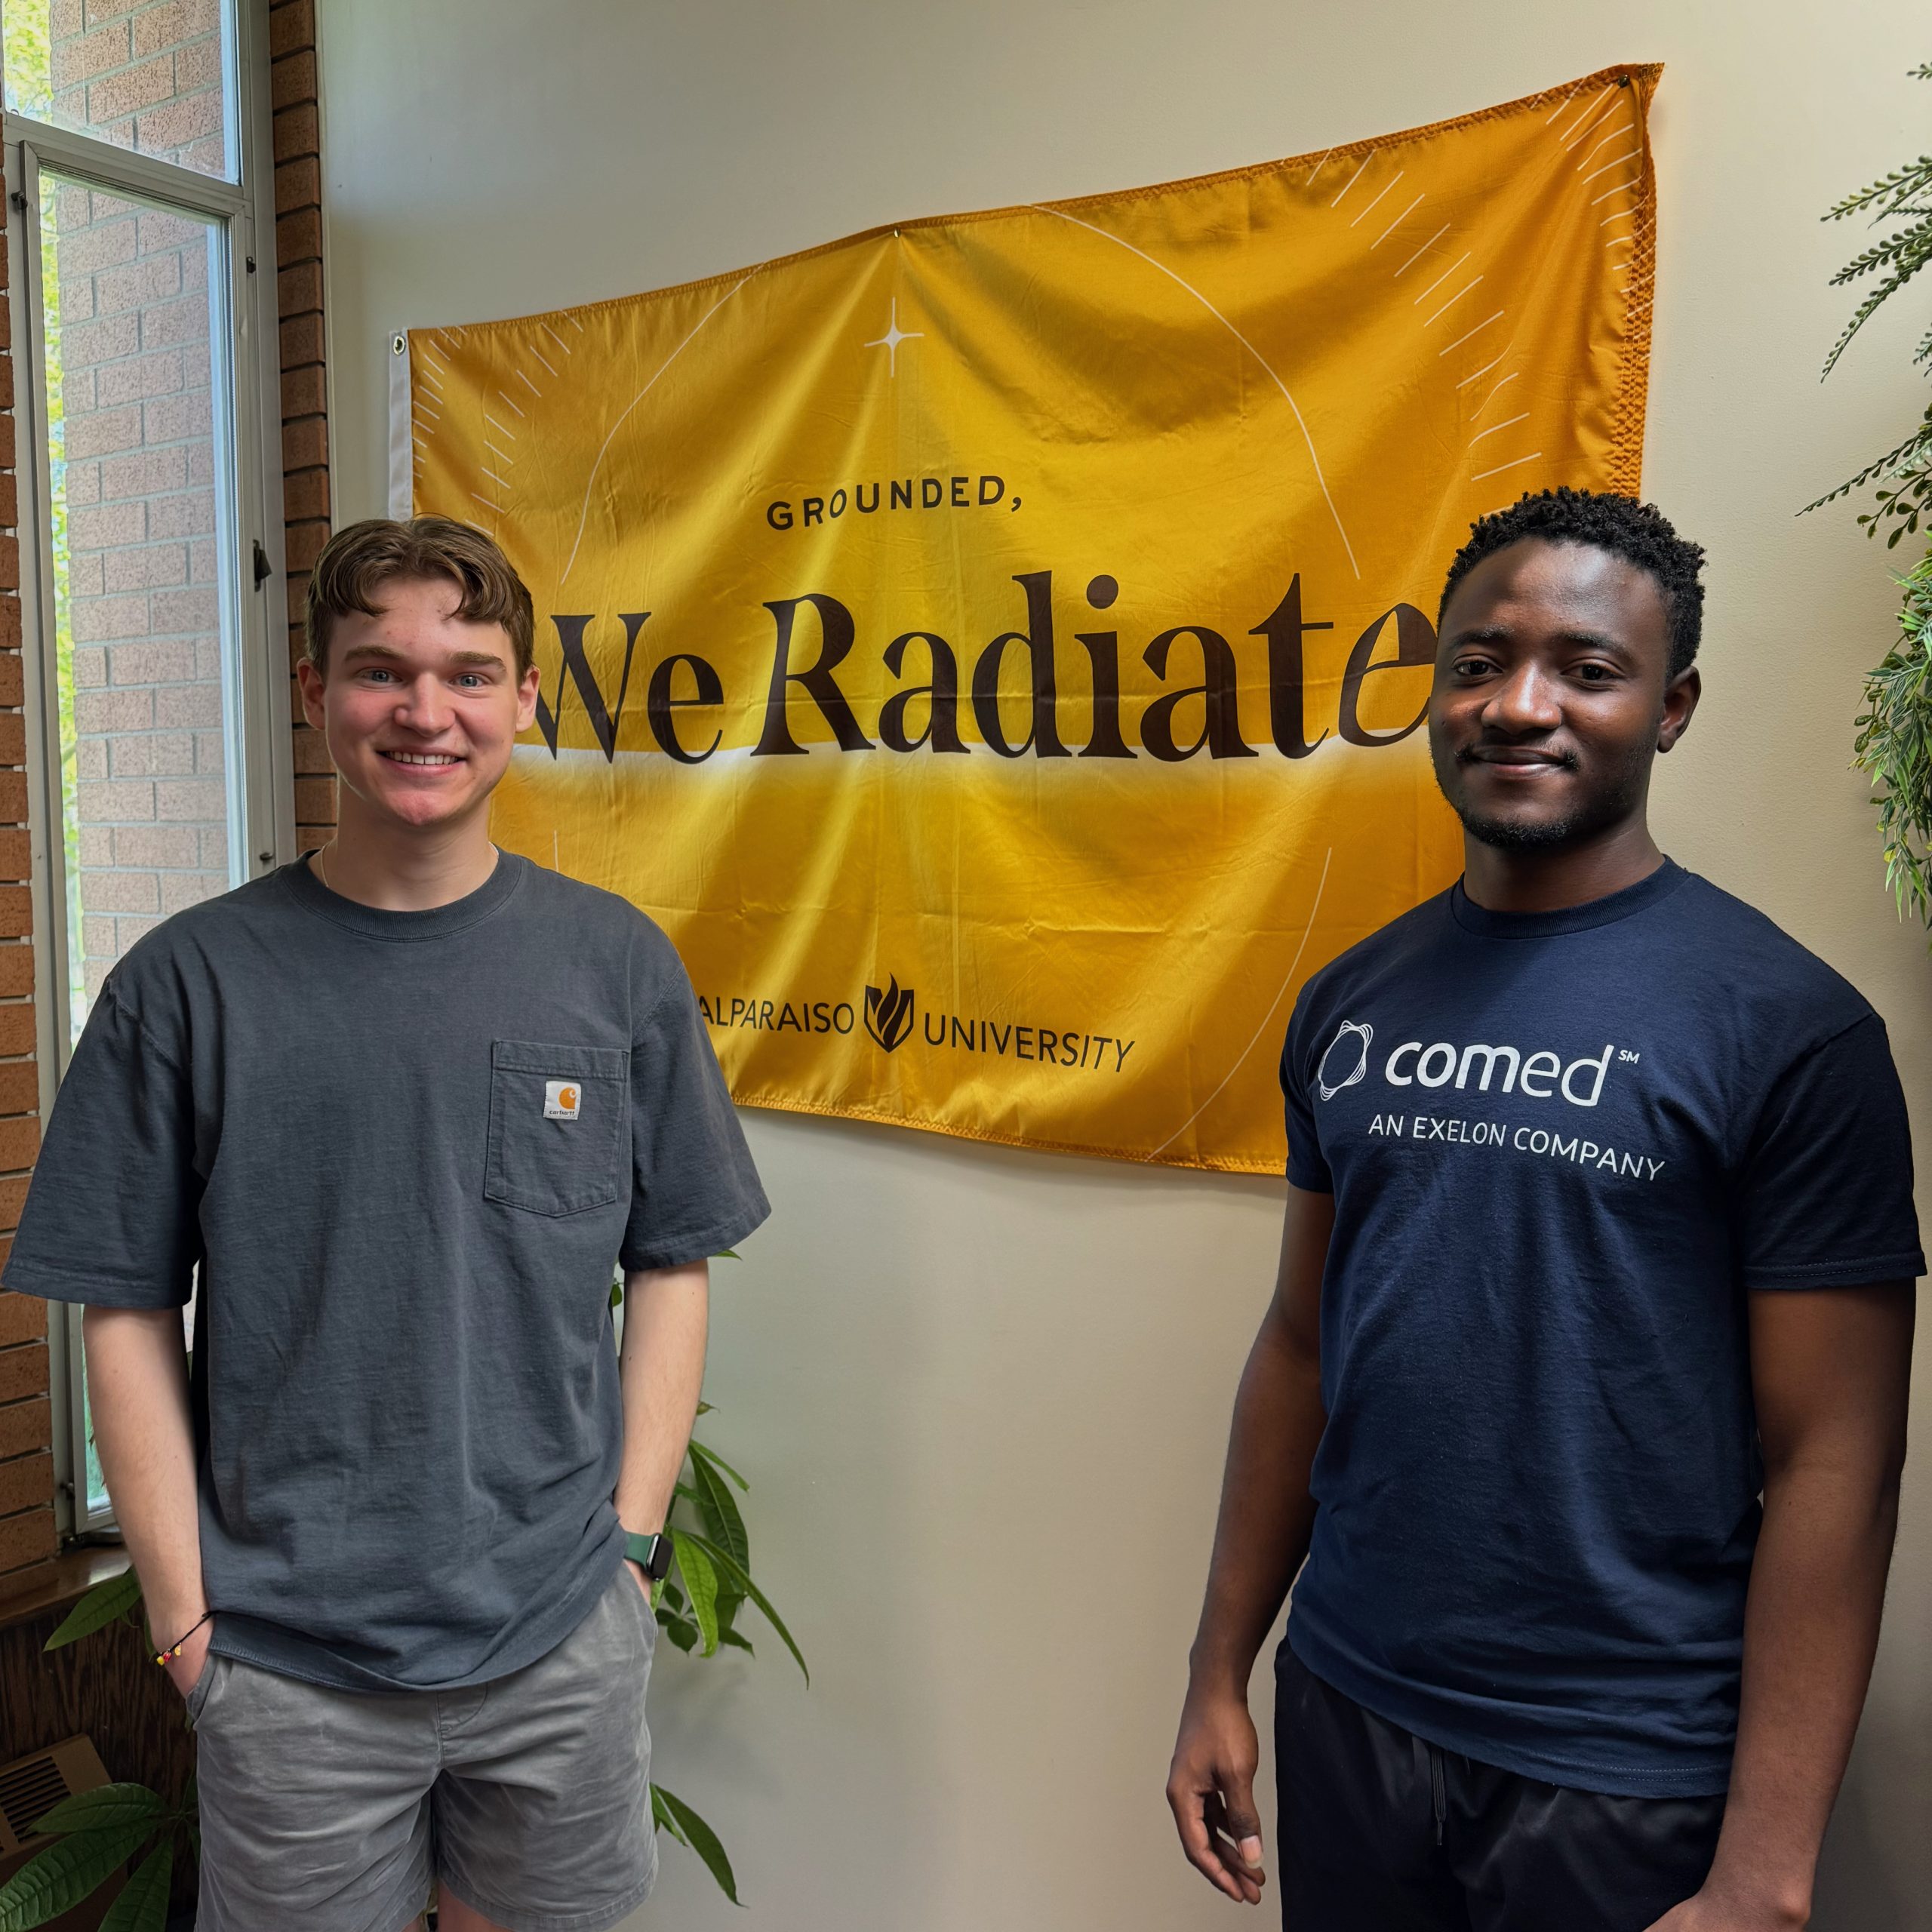 Charles Smith ’25 and Fayol Ateufack Zeudom ’26 smiling at the camera in front of a Valparaiso University flag reading, "Grounded, We Radiate".